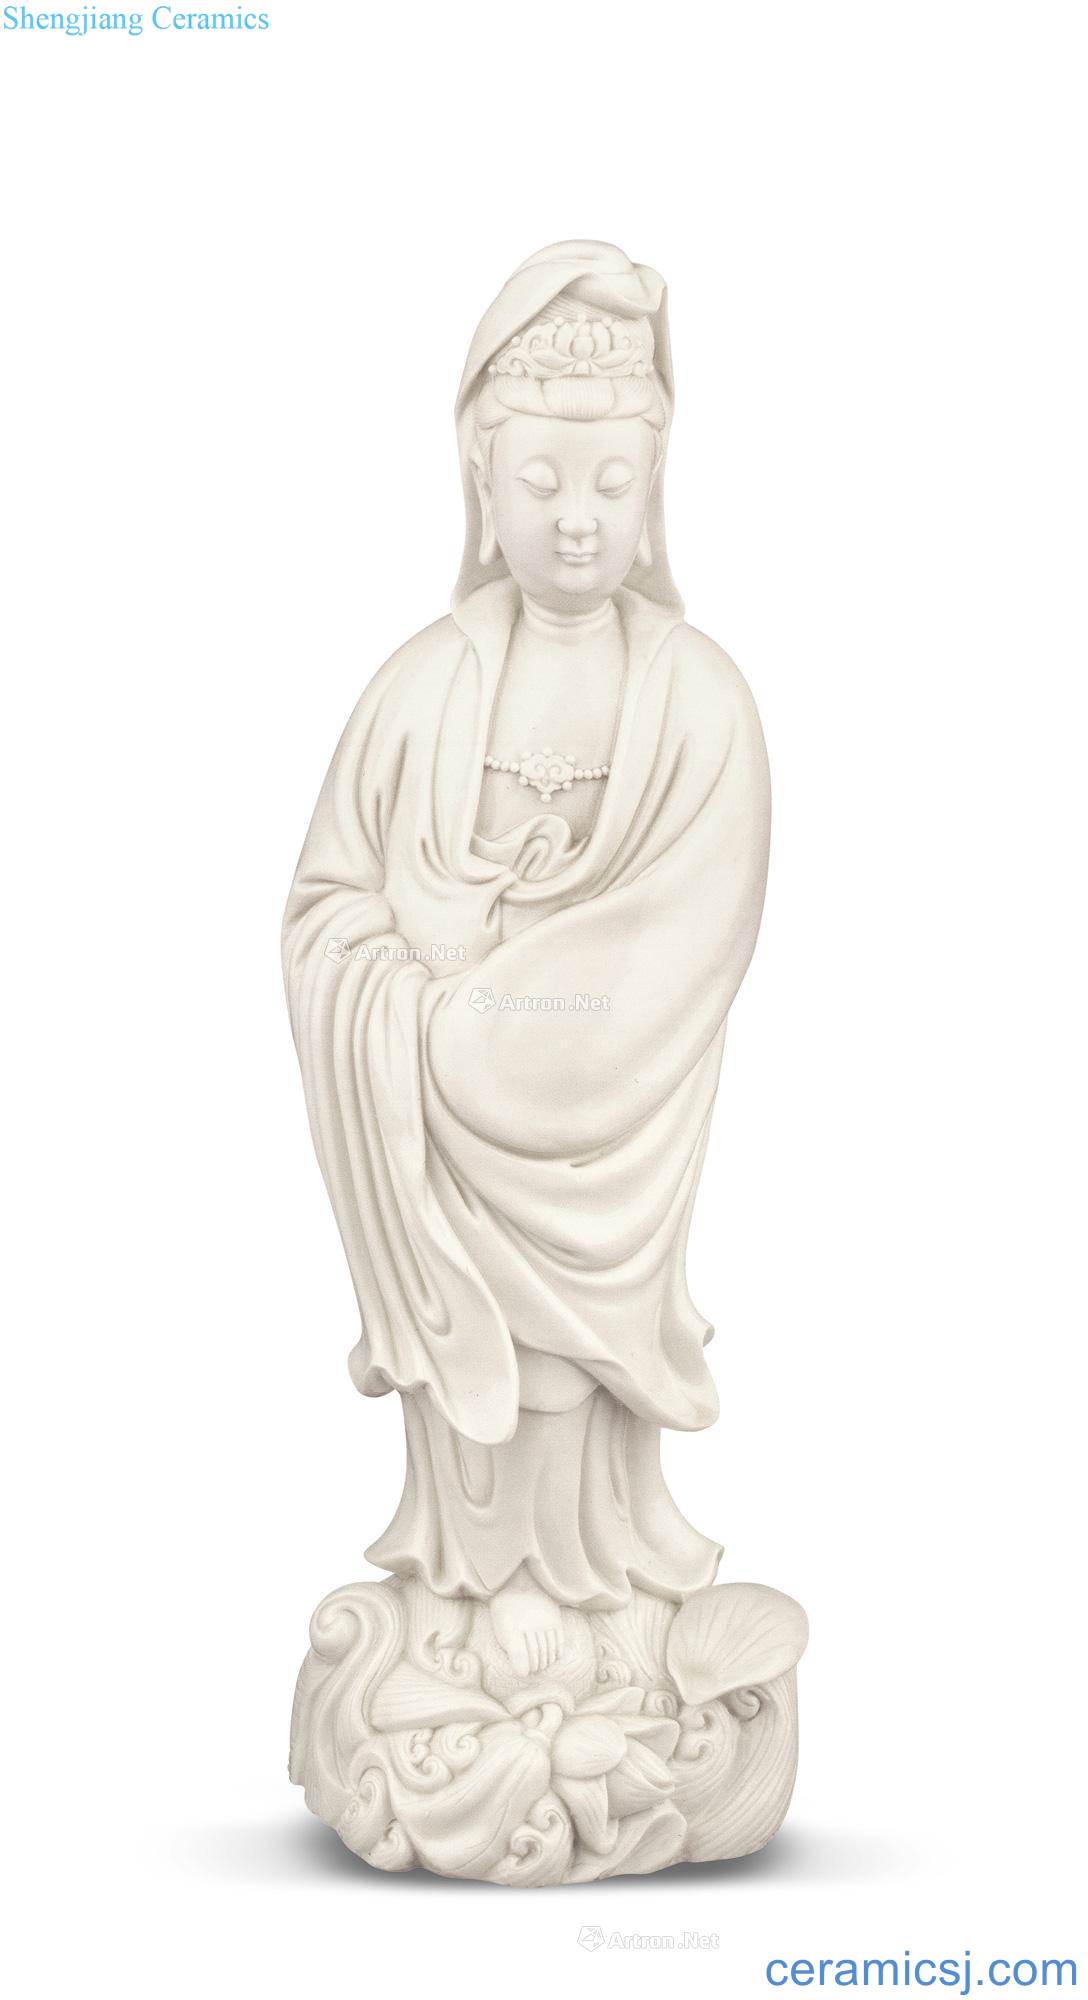 In the late Ming Guanyin stands resemble He Chaozong model